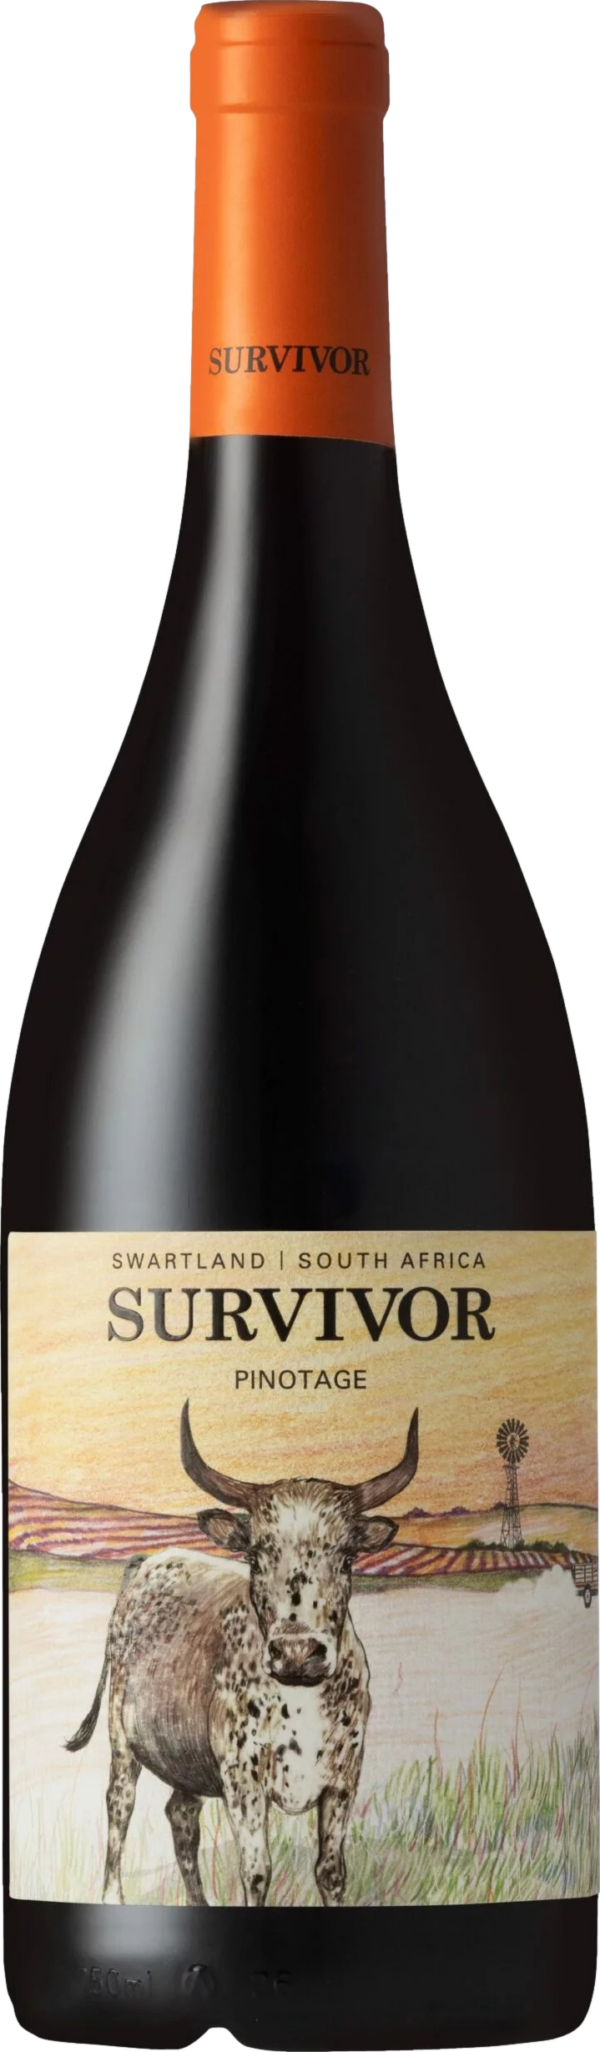 Product image of Survivor Pinotage 2021 from 8wines